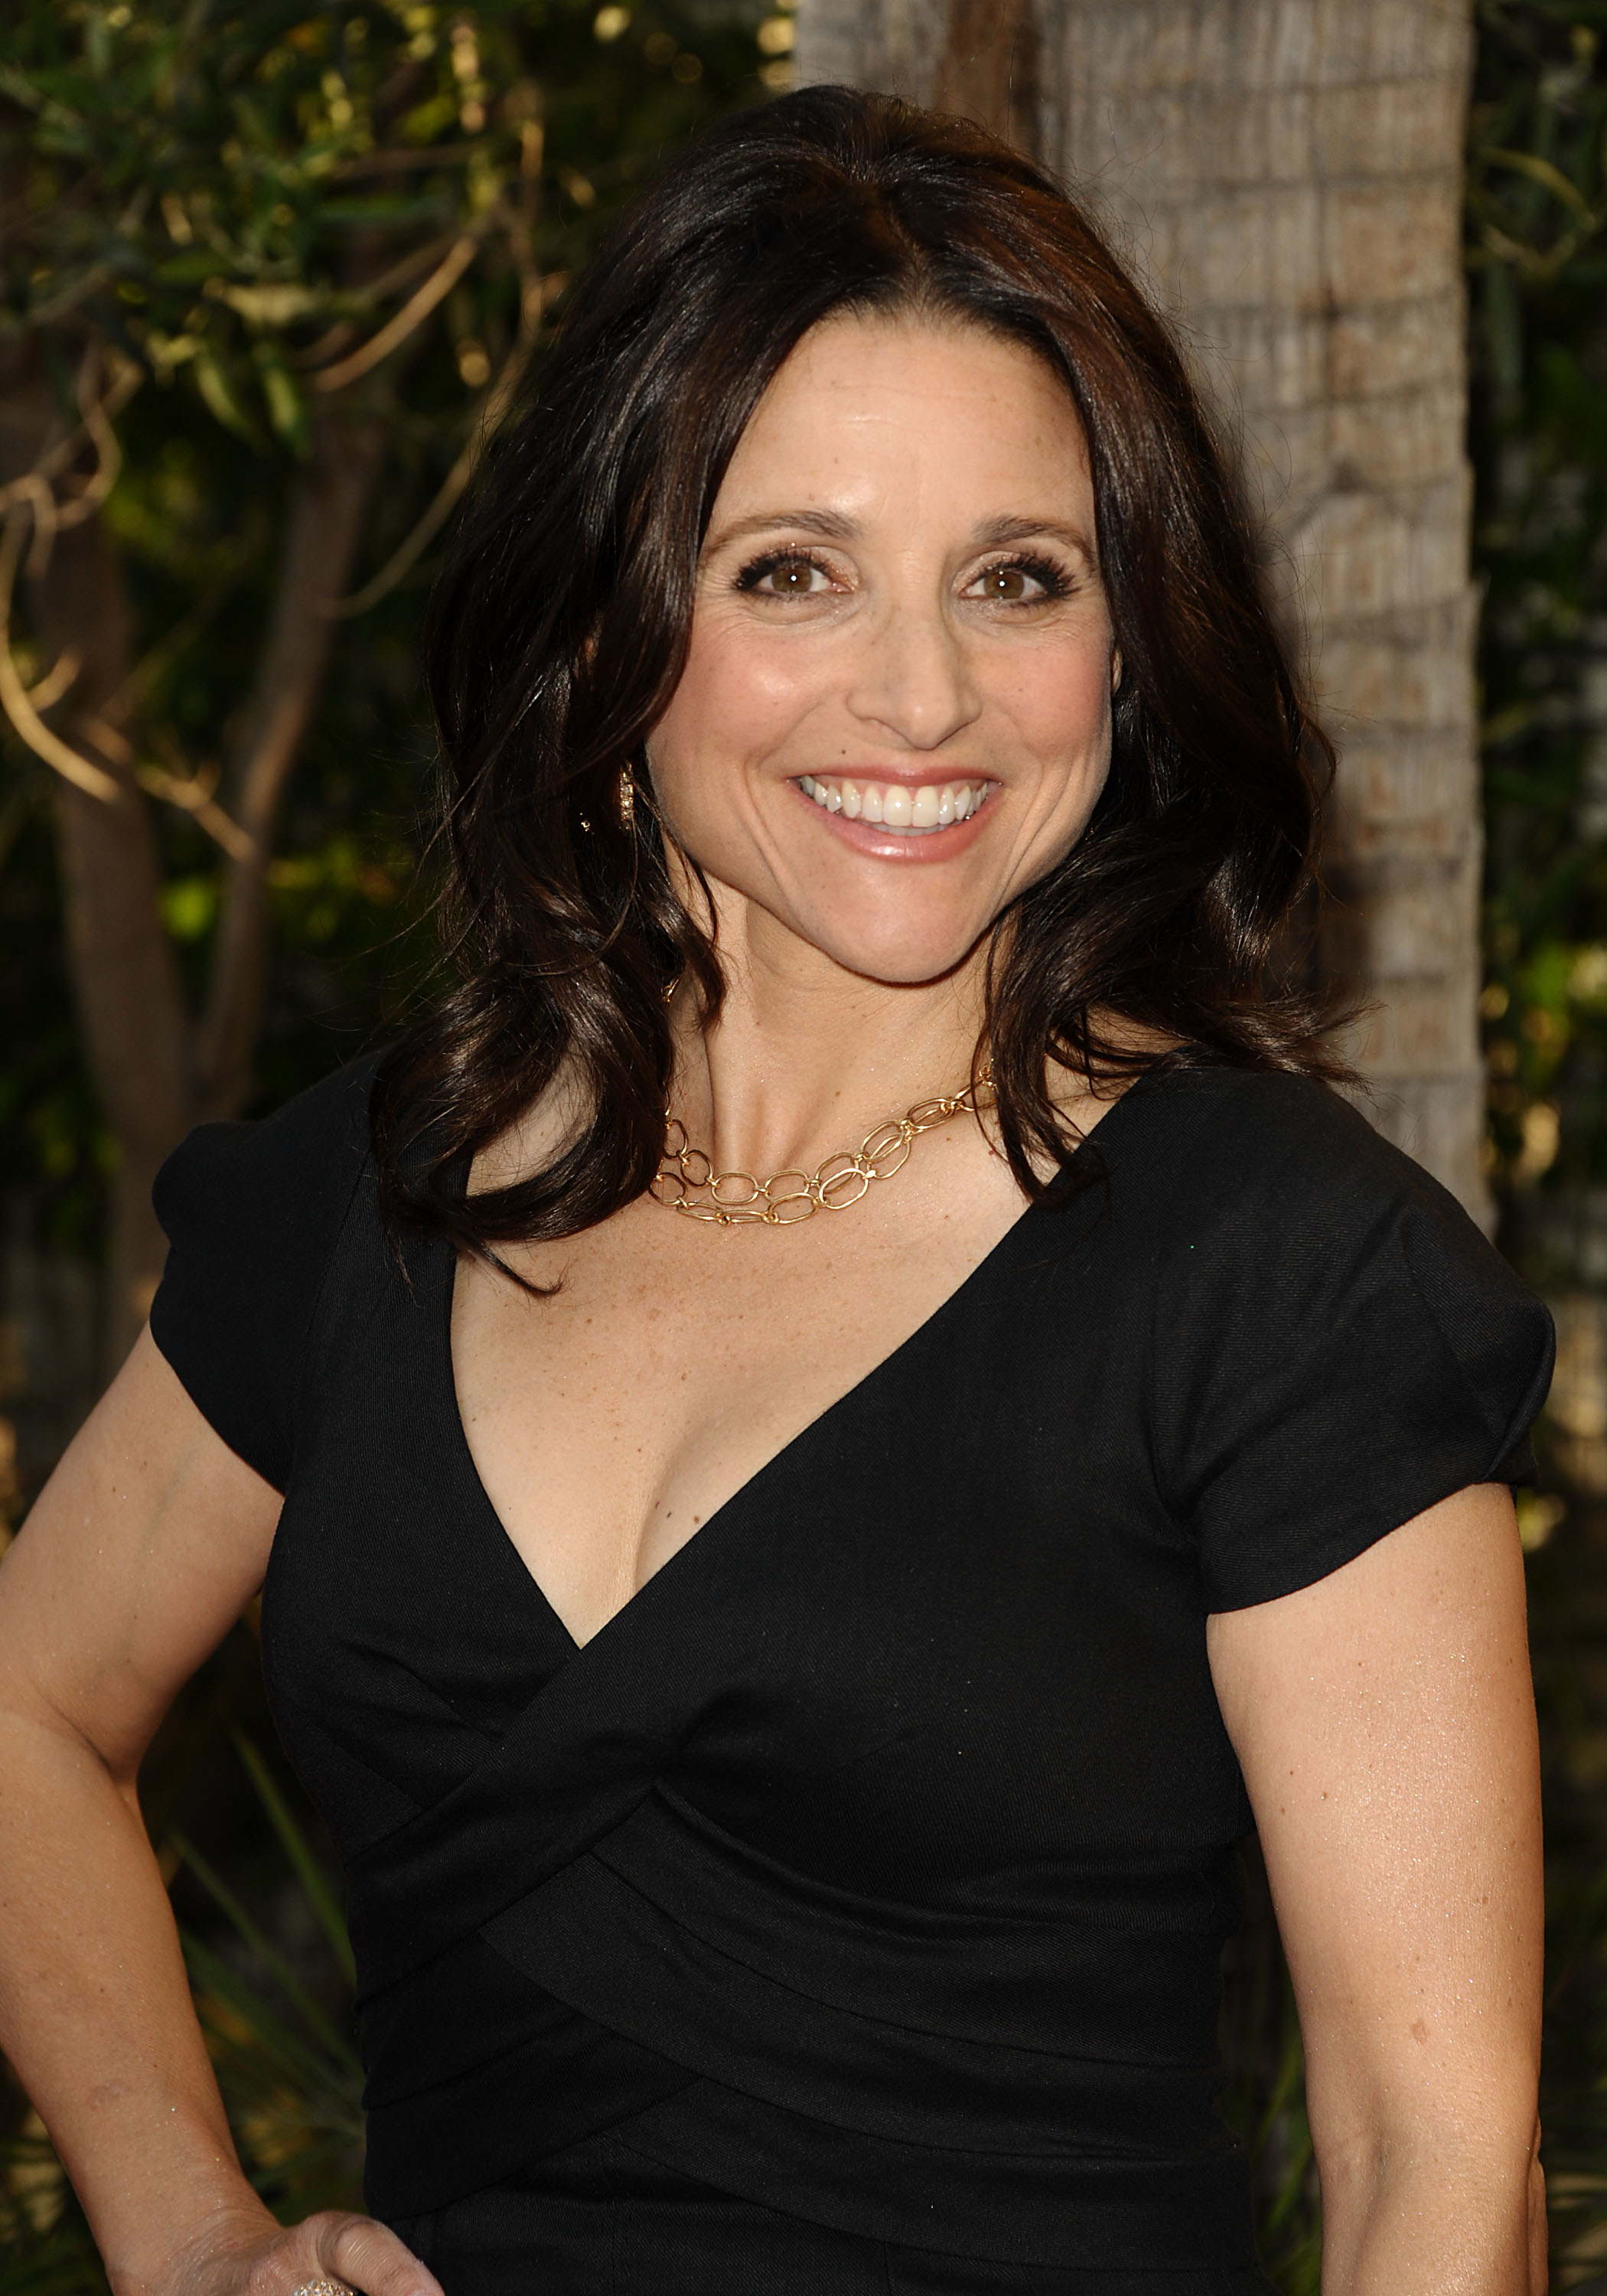 Smiling woman with medium-length hair in a V-neck black dress and gold necklace